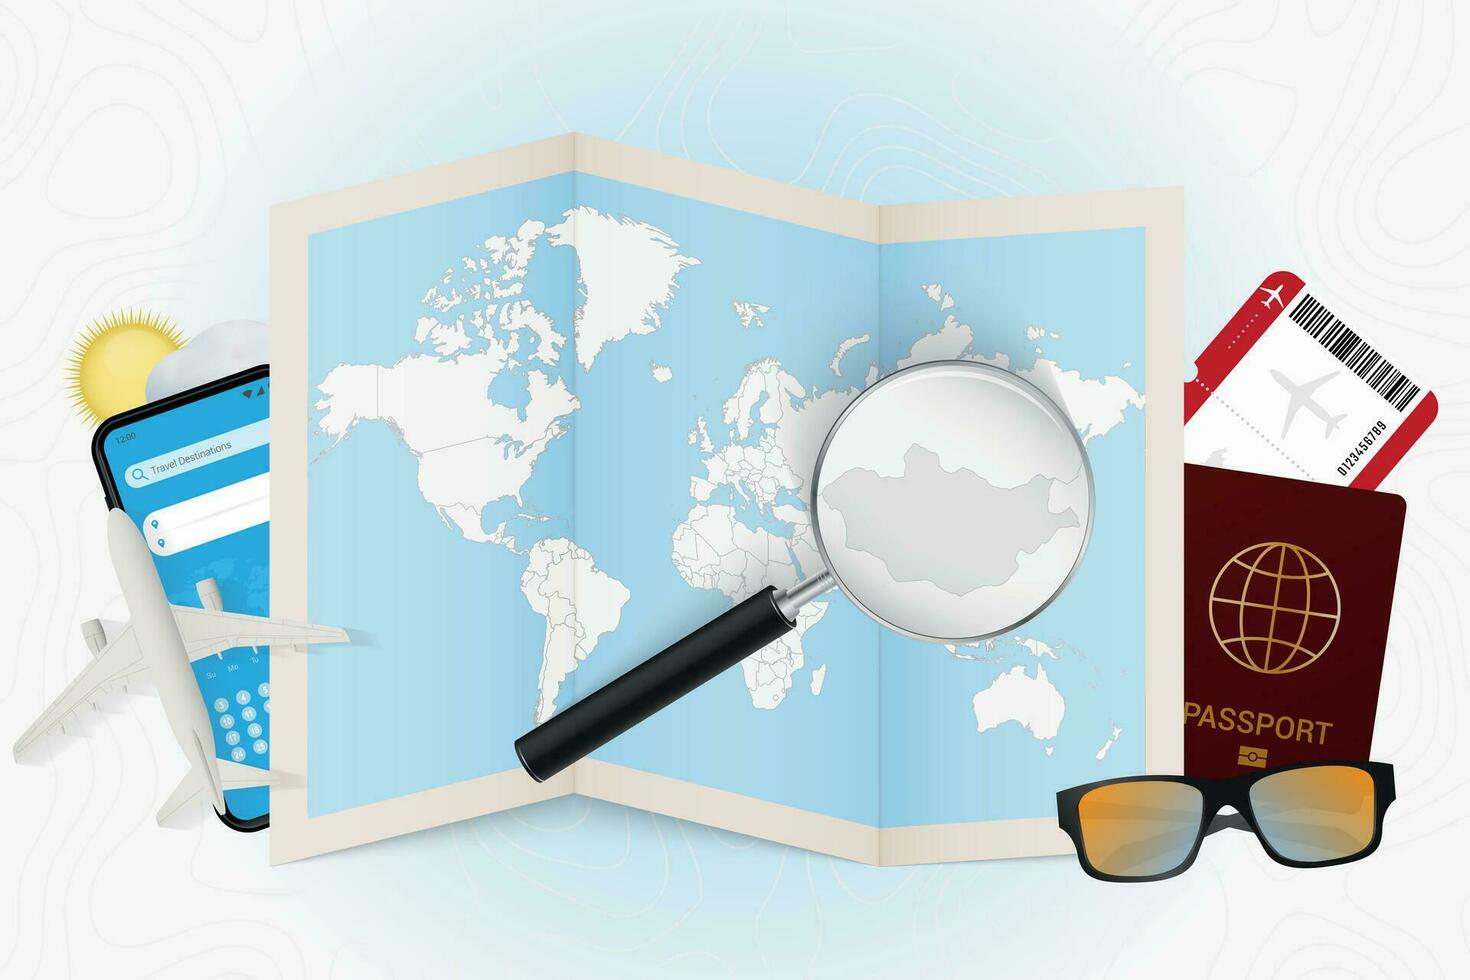 Travel destination Mongolia, tourism mockup with travel equipment and world map with magnifying glass on a Mongolia. vector